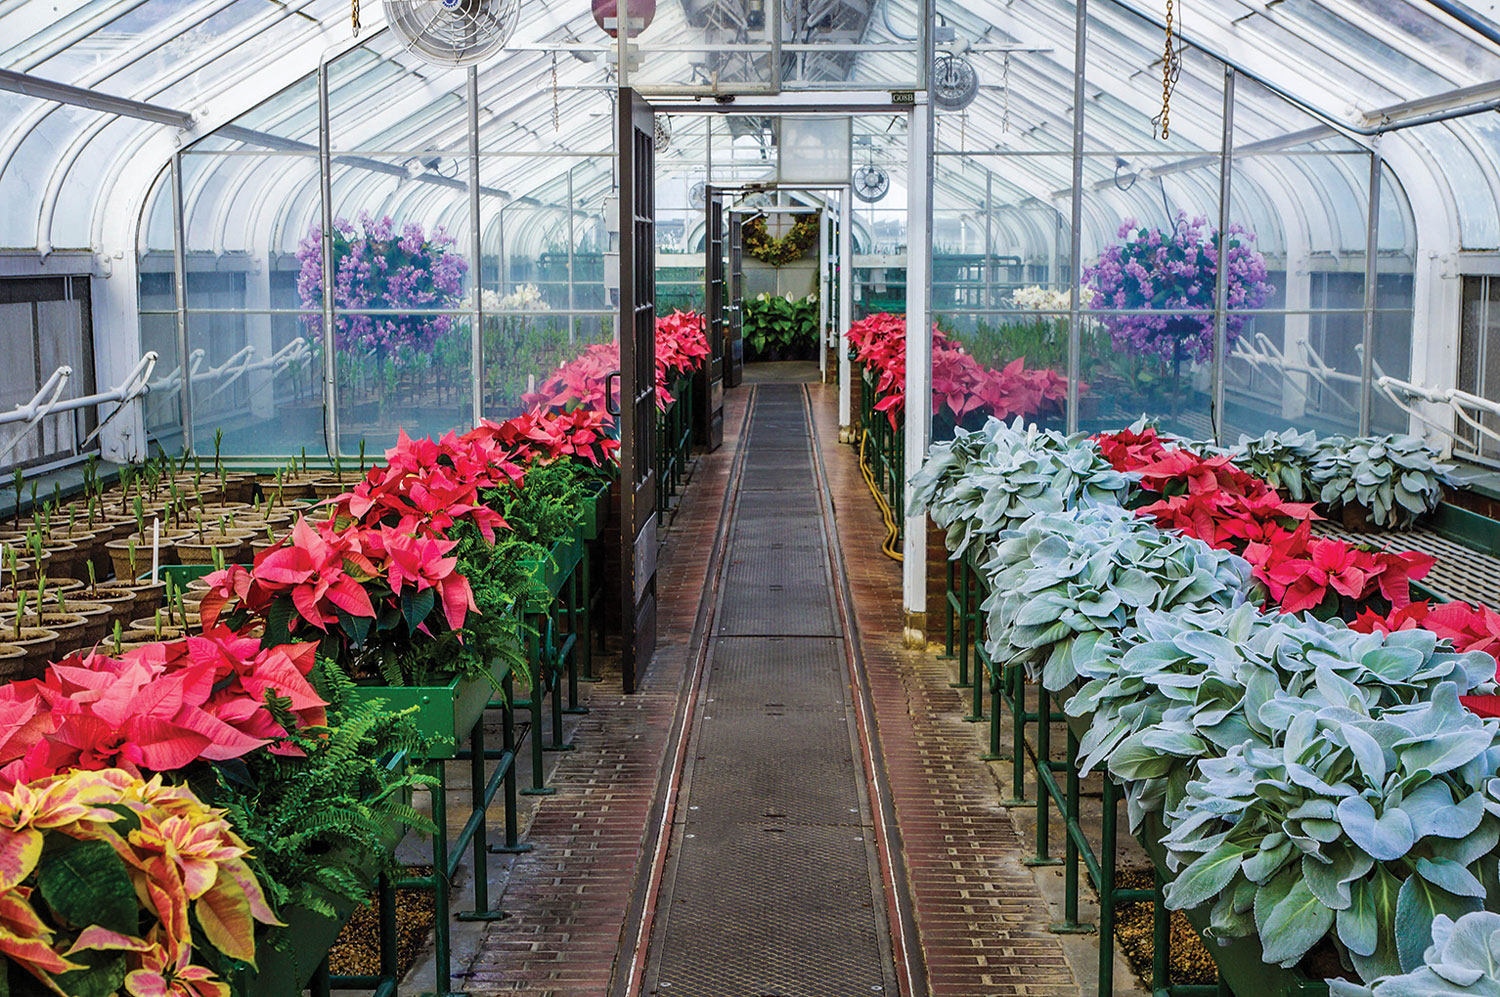 Simple ways to prolong the life of poinsettias - With proper care poinsettia plants can continue to thrive and bring warmth and beauty to a home long after the holiday decorations have been tucked away.